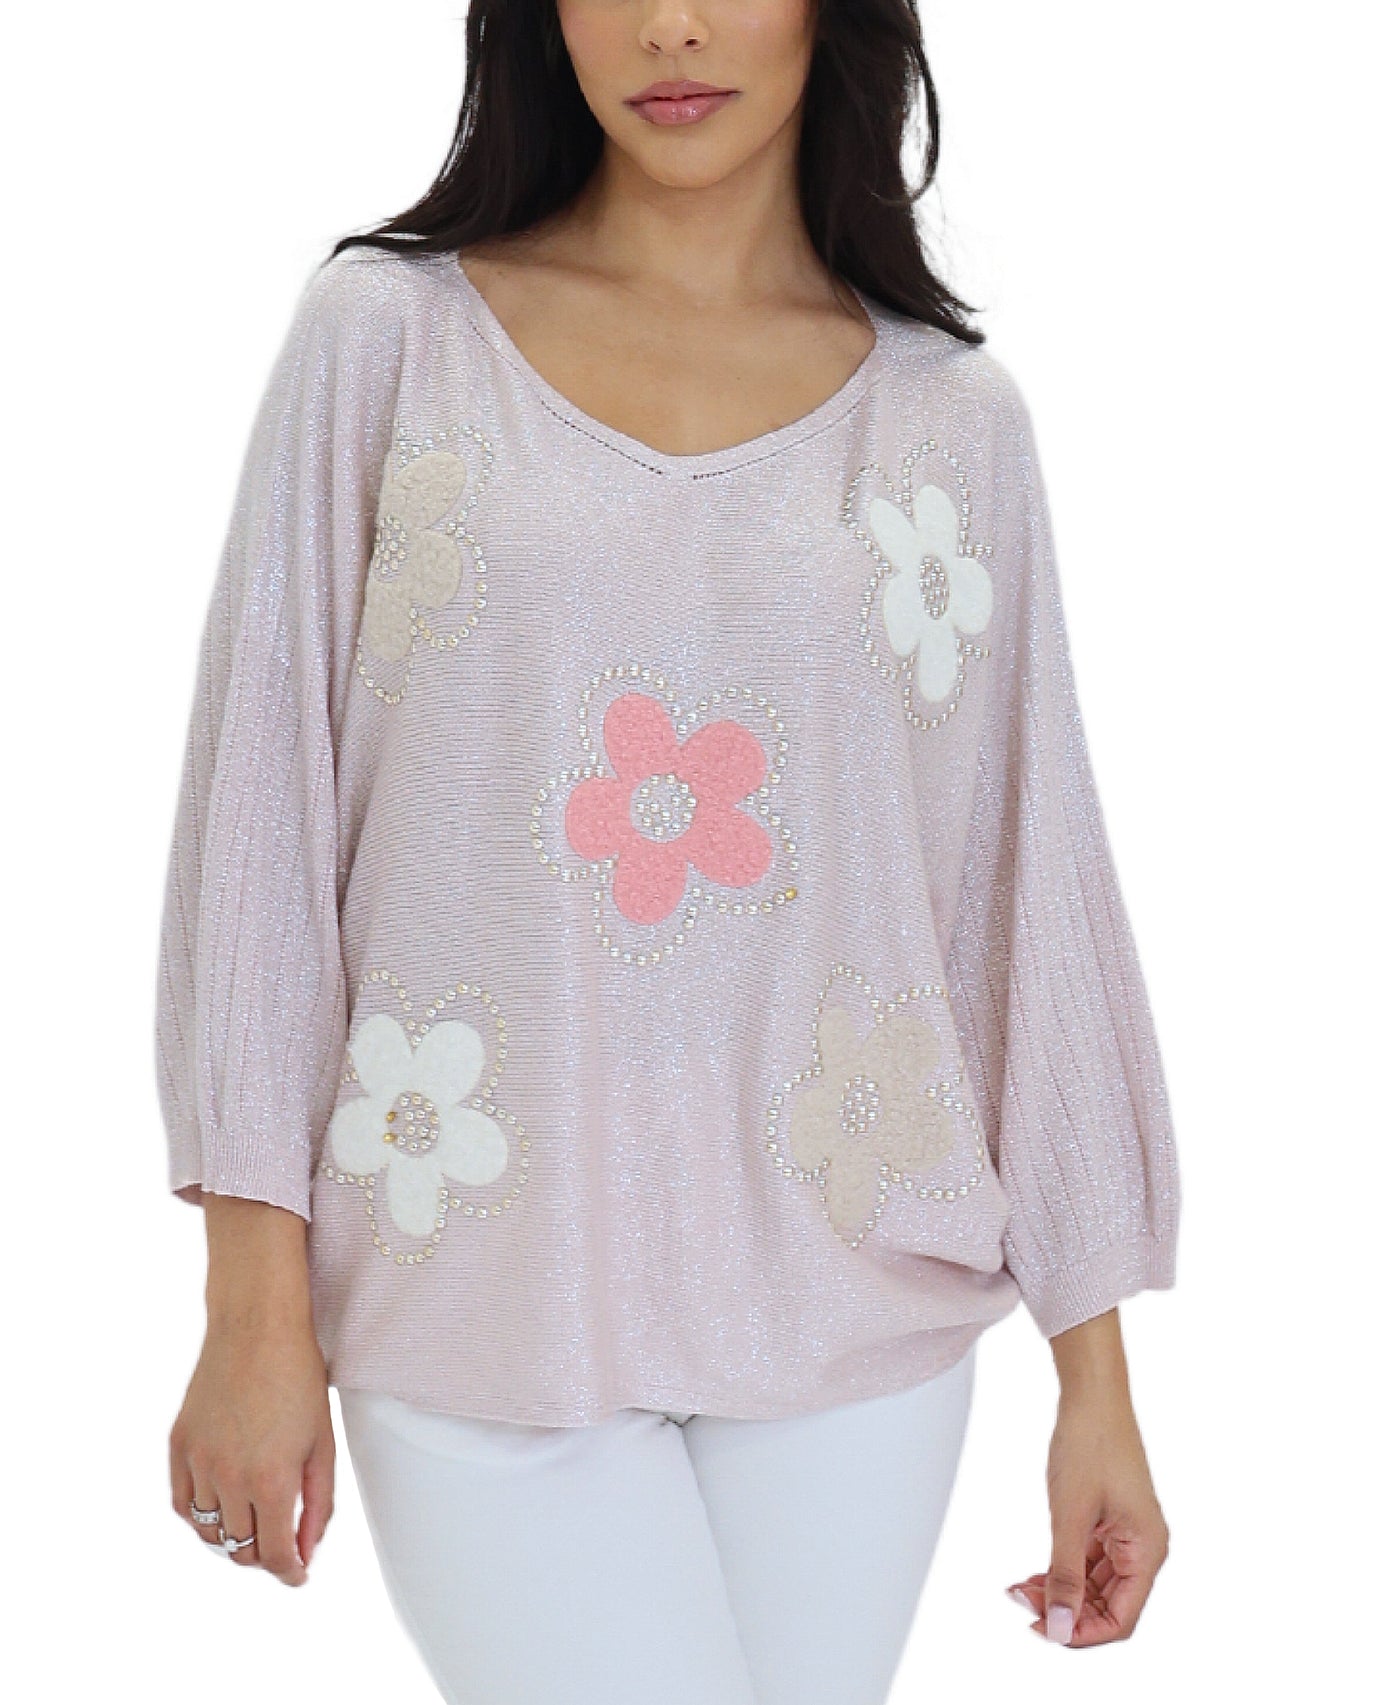 Shimmer Knit Top w/ Flowers & Studs view 1